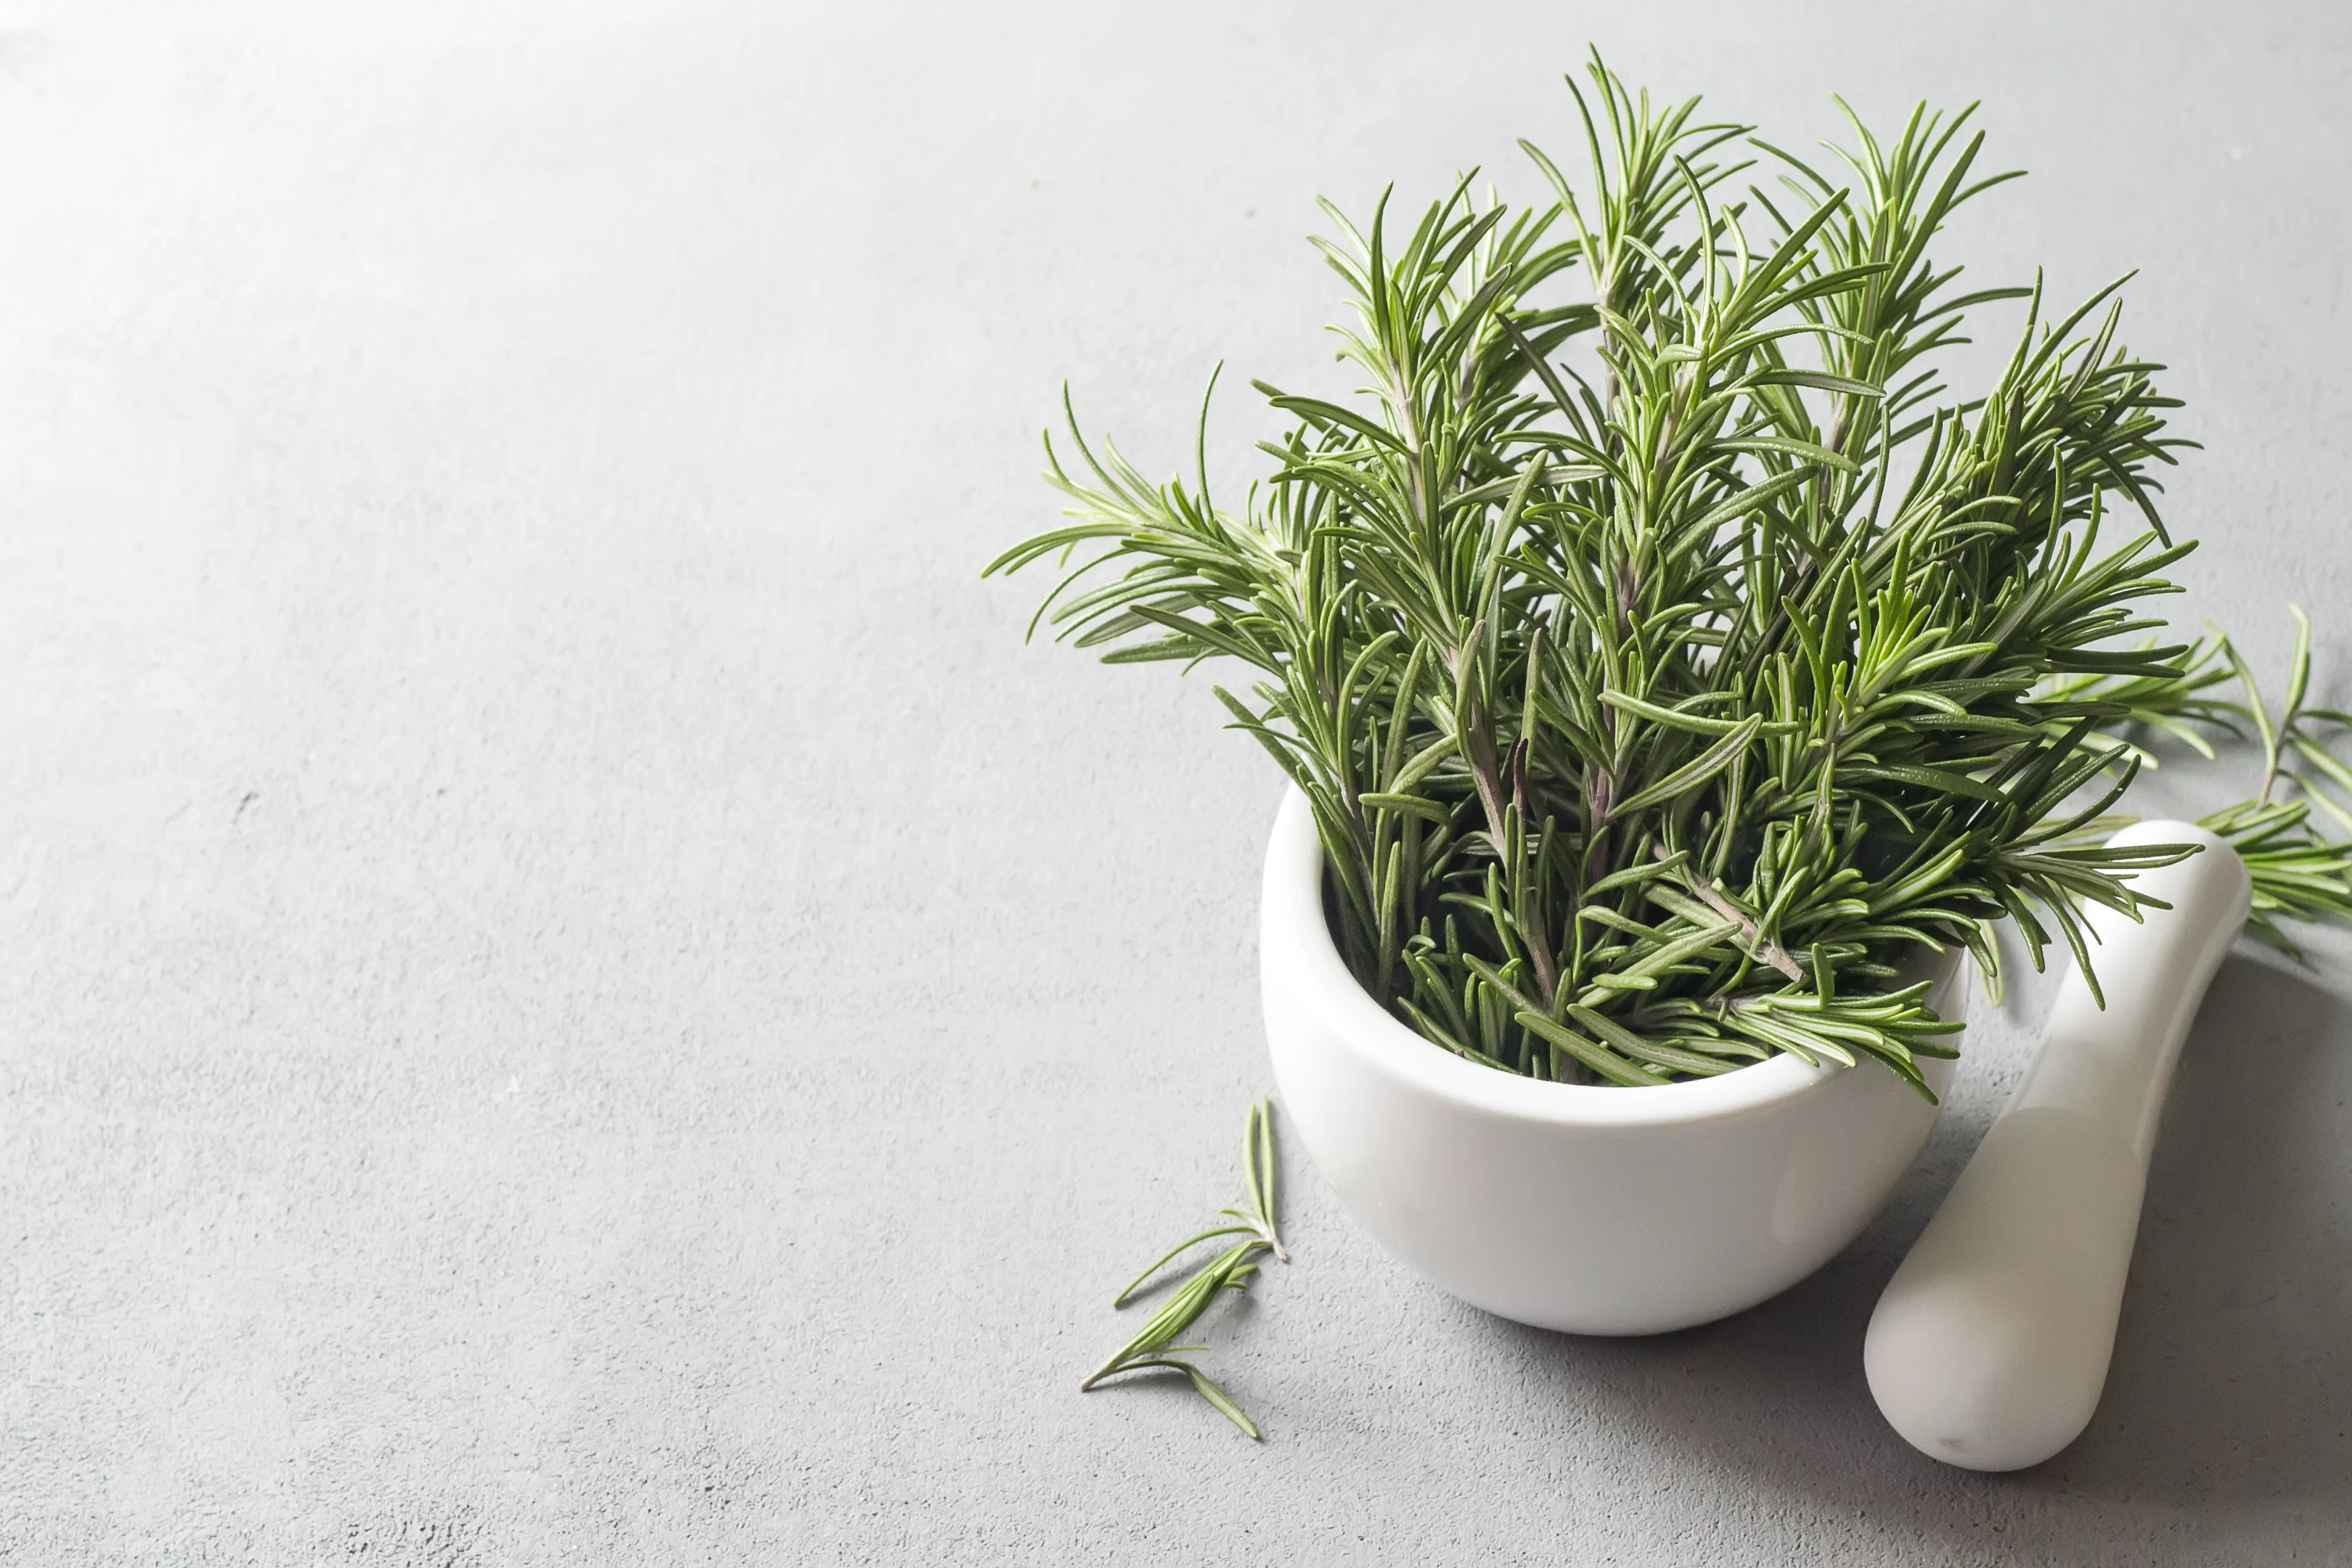 Rosemary in a ceramic bowl on a light background